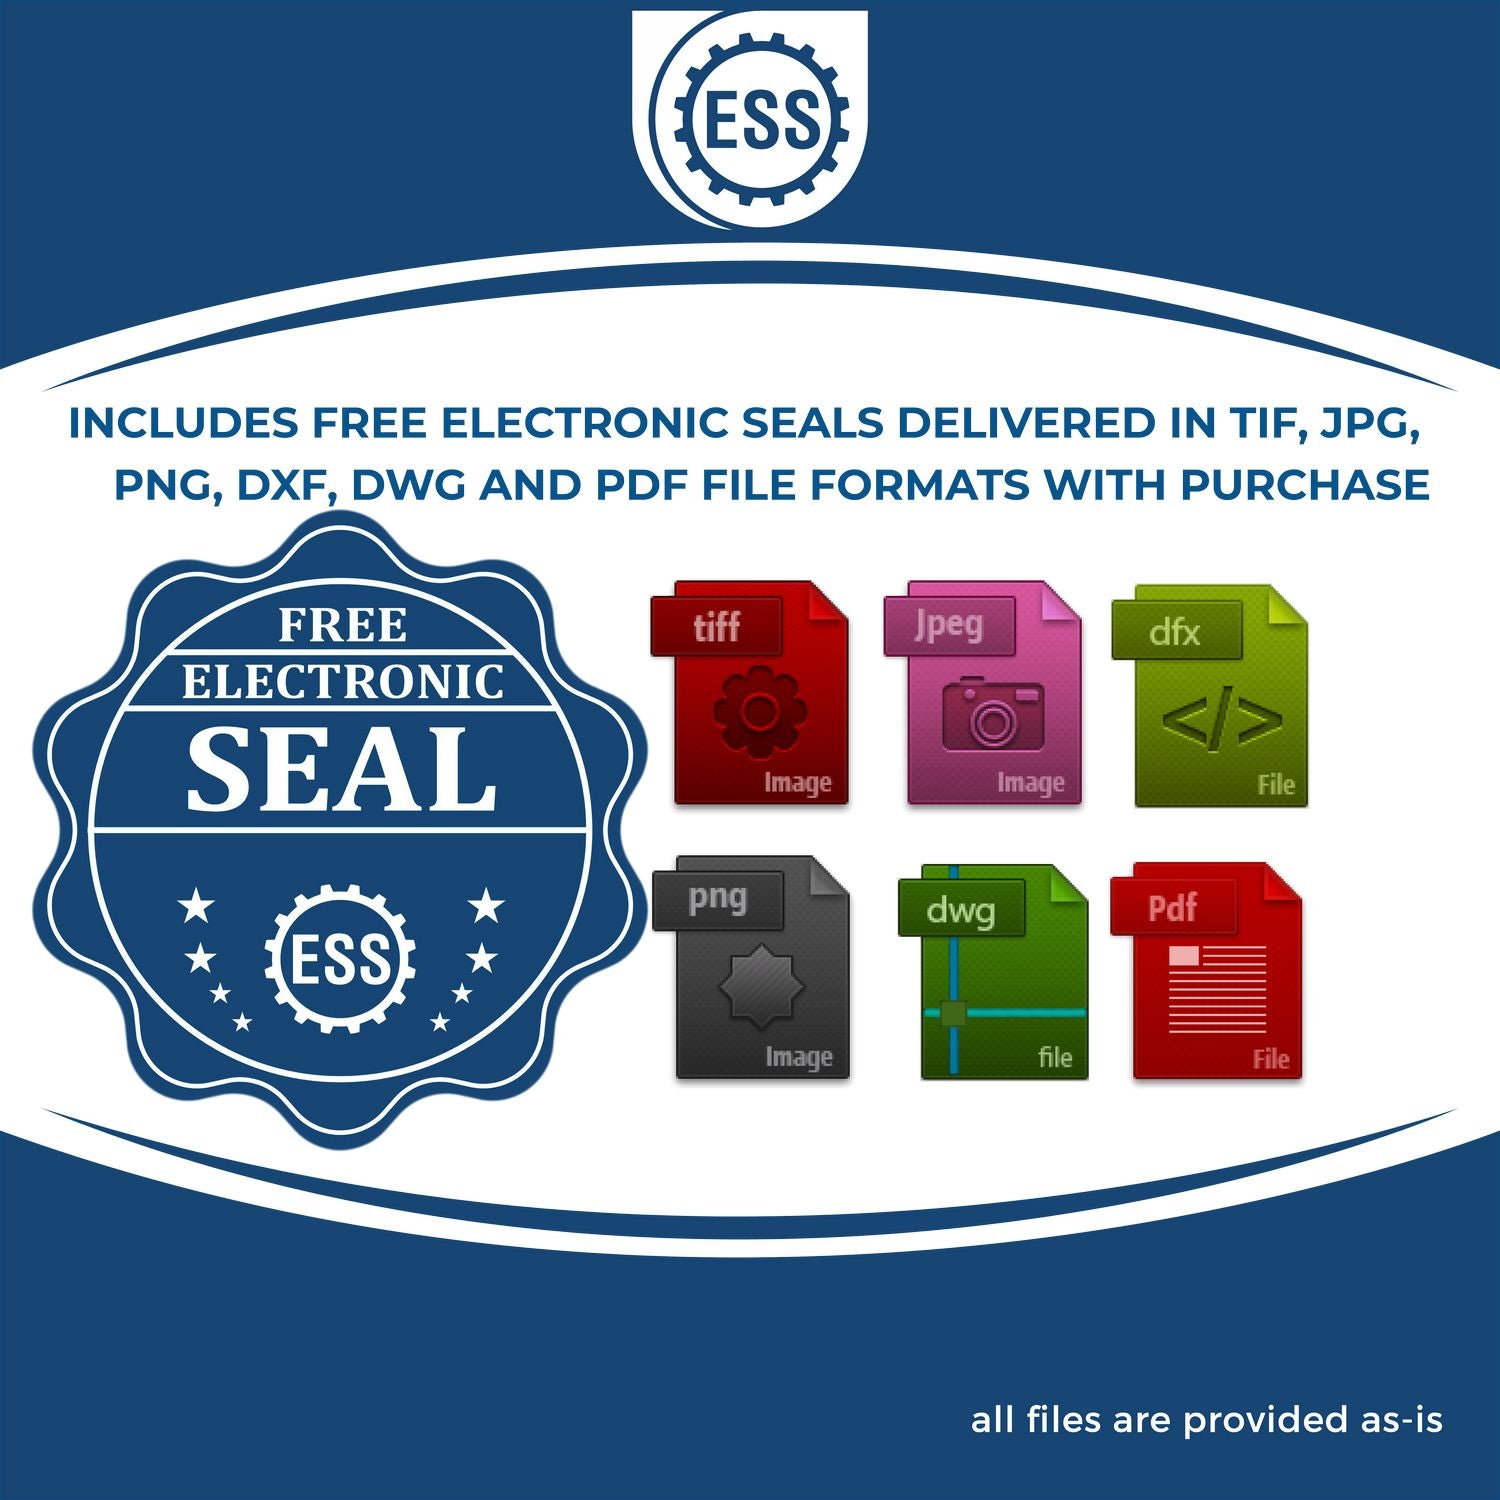 An infographic for the free electronic seal for the Premium MaxLight Pre-Inked South Dakota Engineering Stamp illustrating the different file type icons such as DXF, DWG, TIF, JPG and PNG.